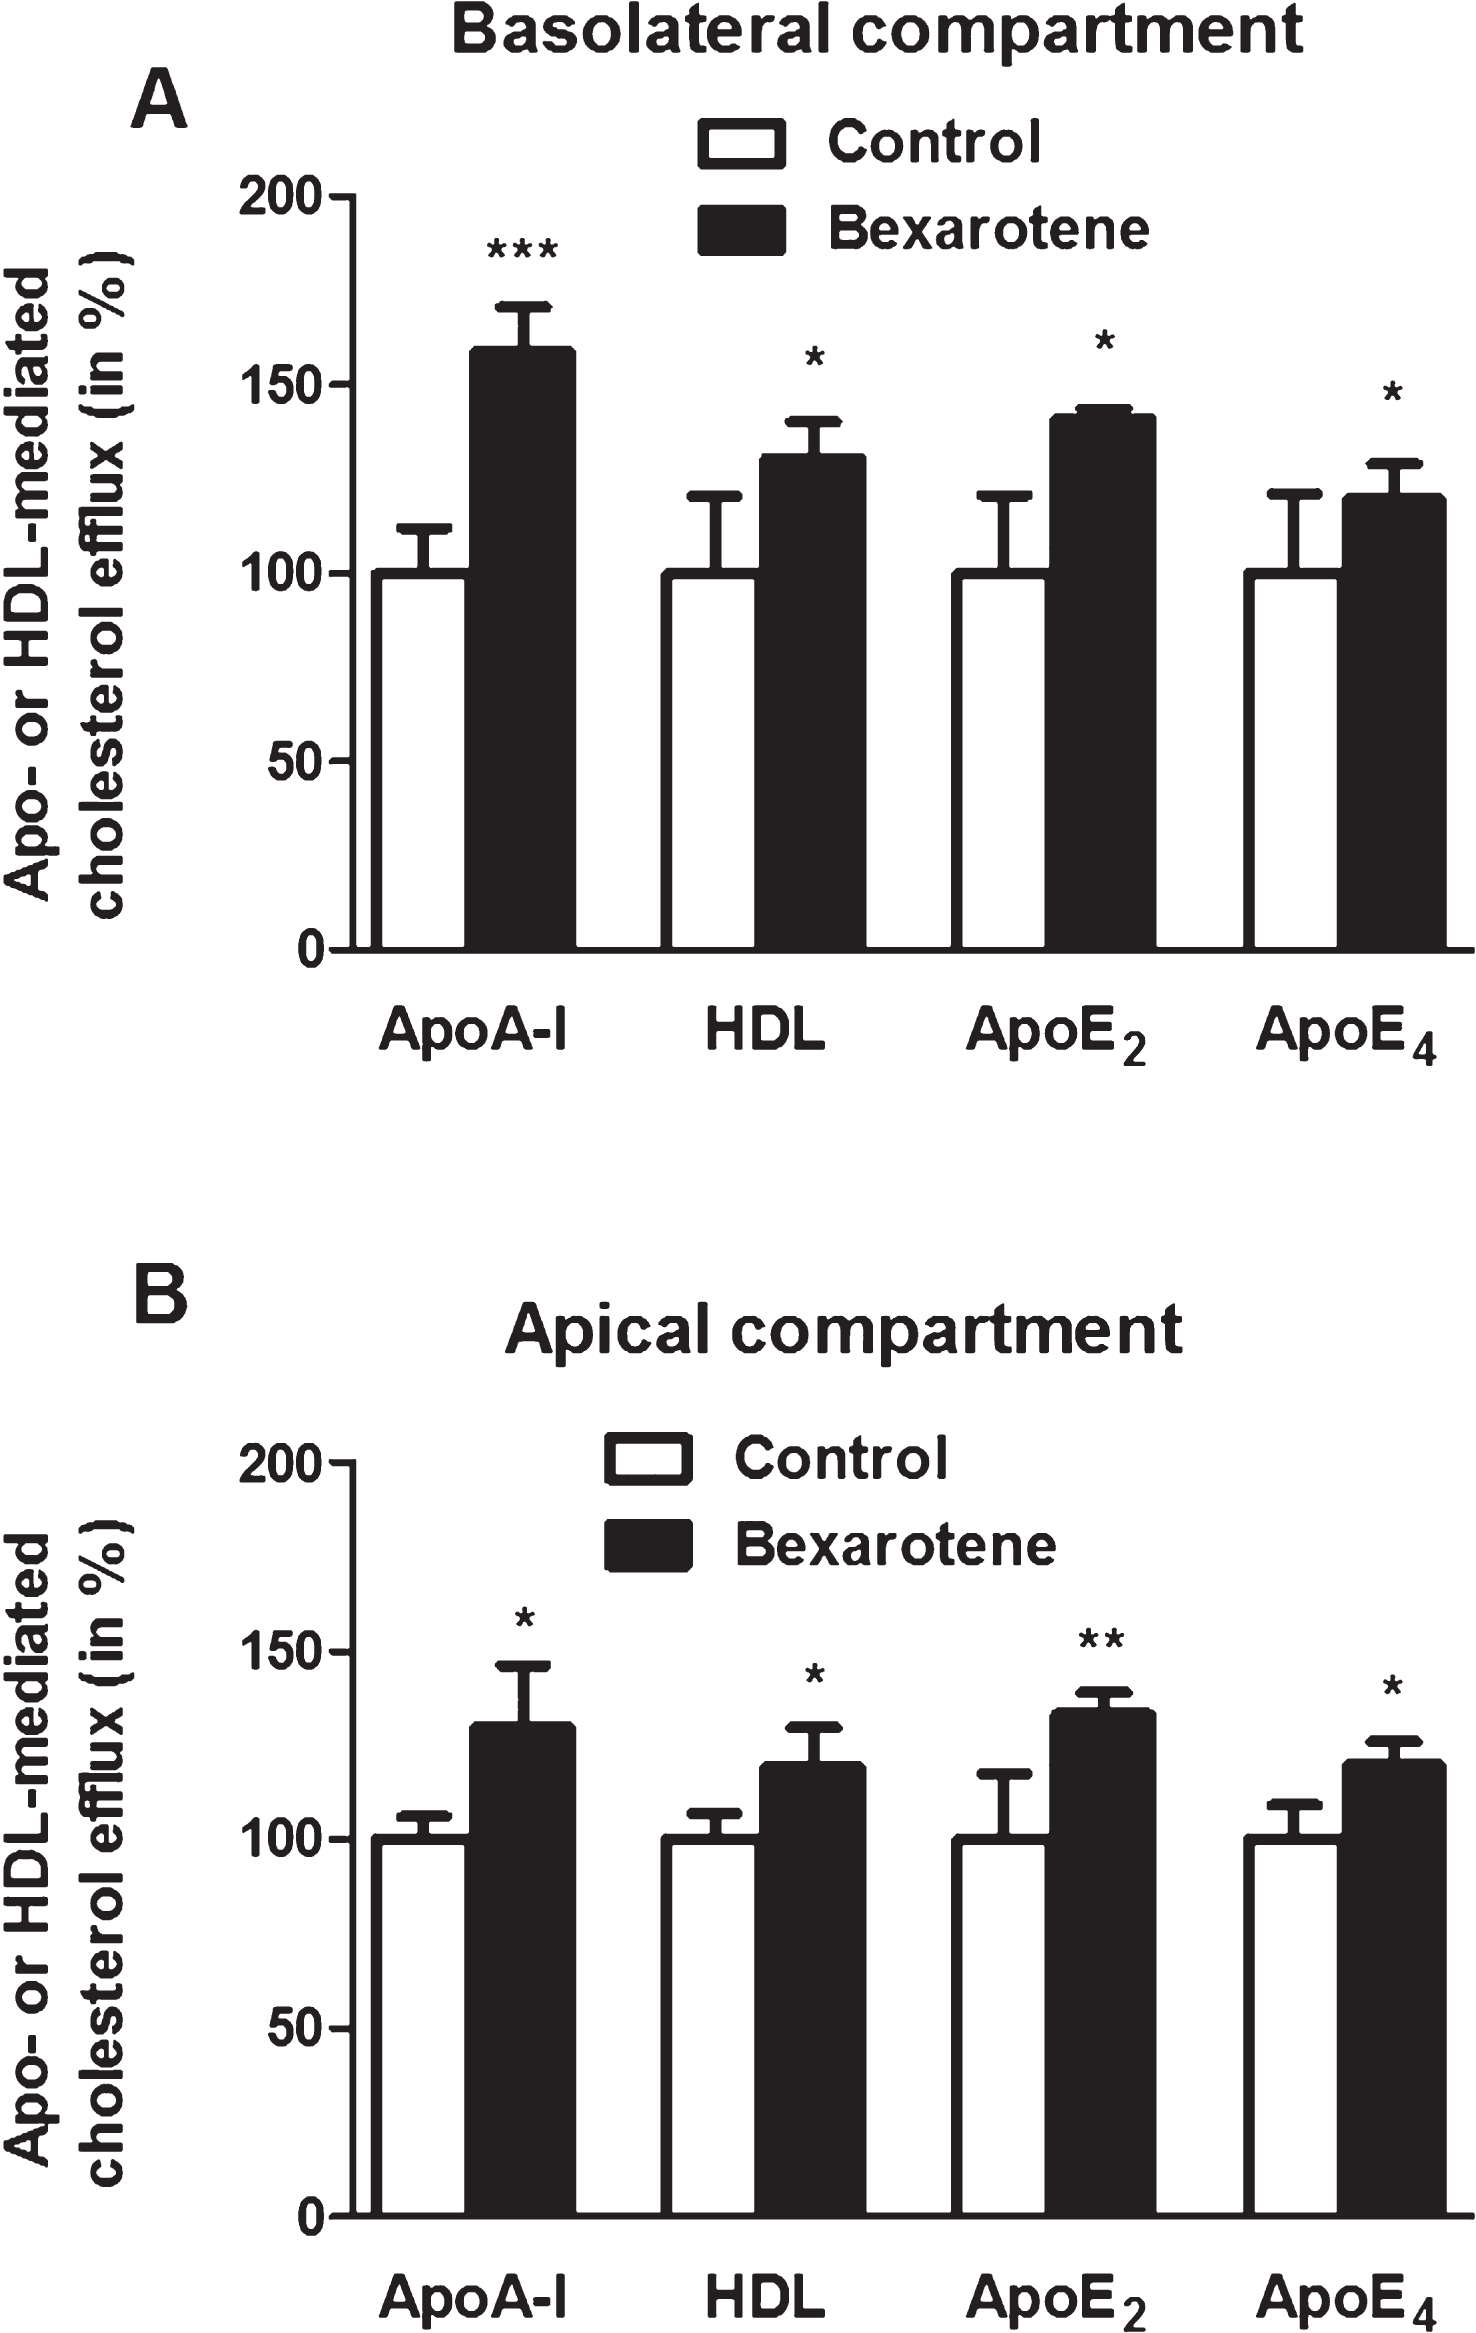 The effect of bexarotene on cholesterol release. To determine the effect of bexarotene on cholesterol efflux into the basolateral (A) and apical (B) compartments, the equilibration step was performed in the presence of DMSO alone (control) or 100 nM bexarotene. Acceptors were added in both compartments. Each bar represents the mean±SEM; n = 6–12.  *p <  0.05;  **p <  0.01;  ***p <  0.001, relative to a DMSO-treated control (in a one-way ANOVA, followed by Bonferroni’s test for multiple comparisons).